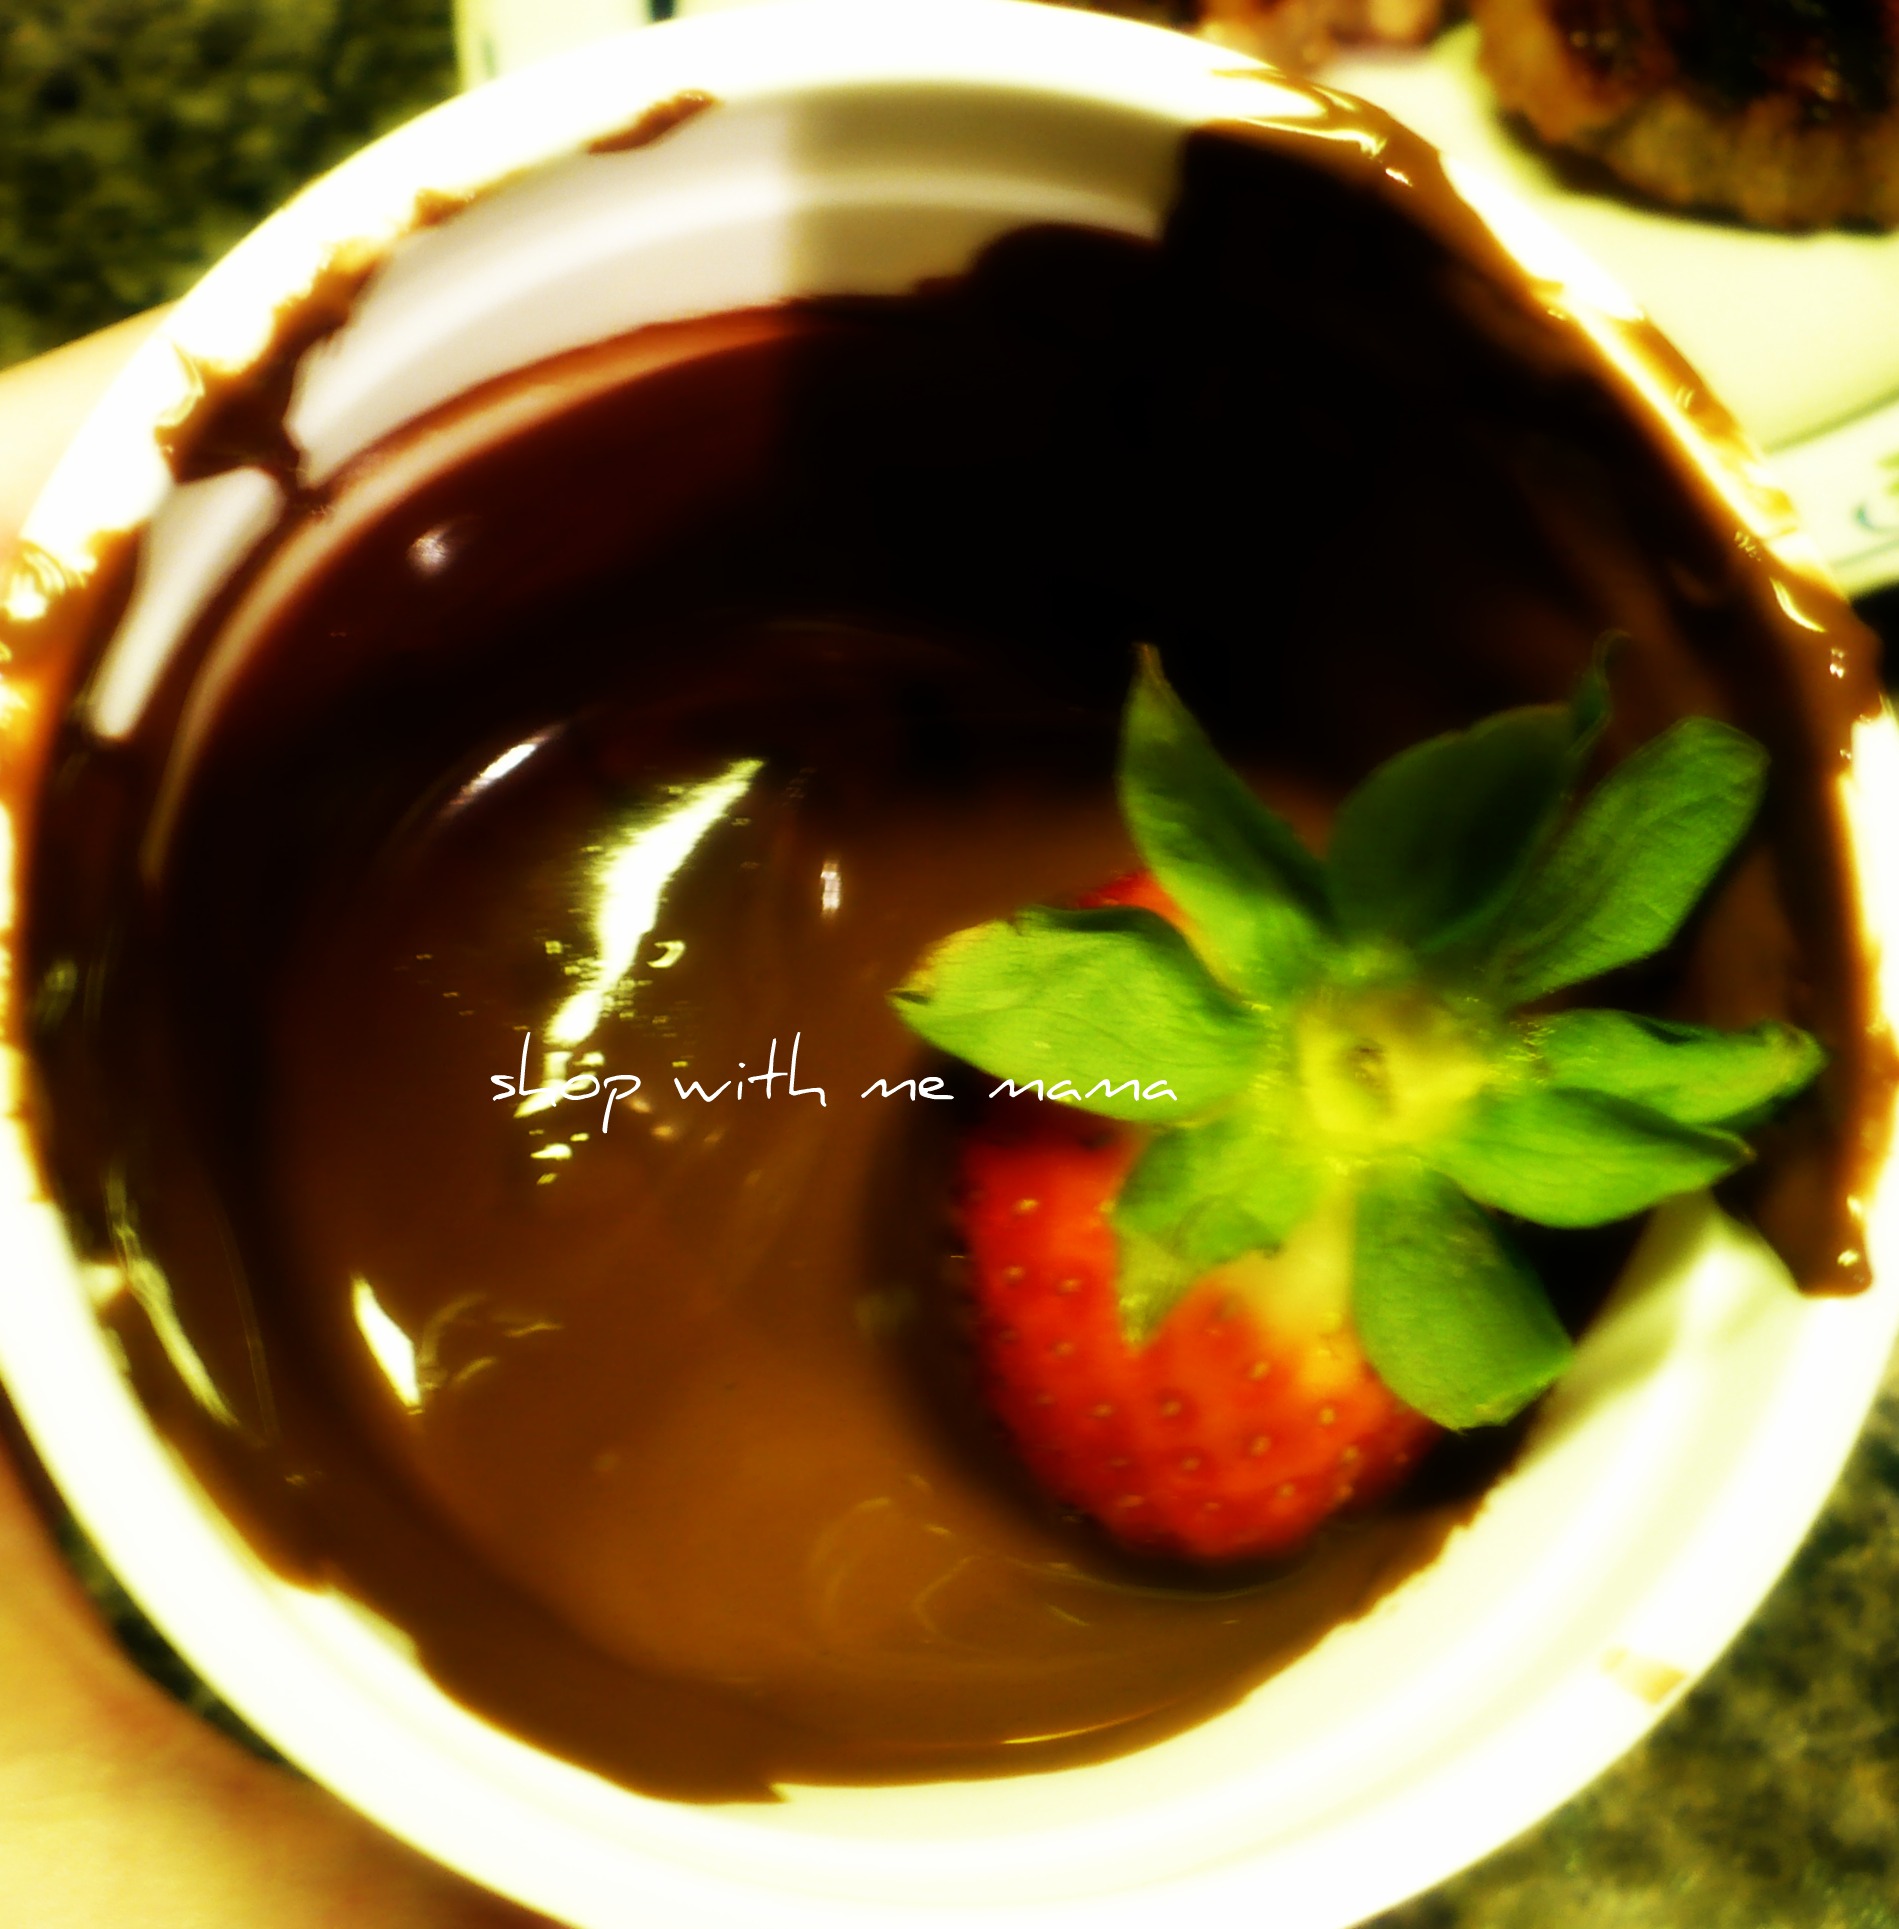 Baker's Dipping Chocolate